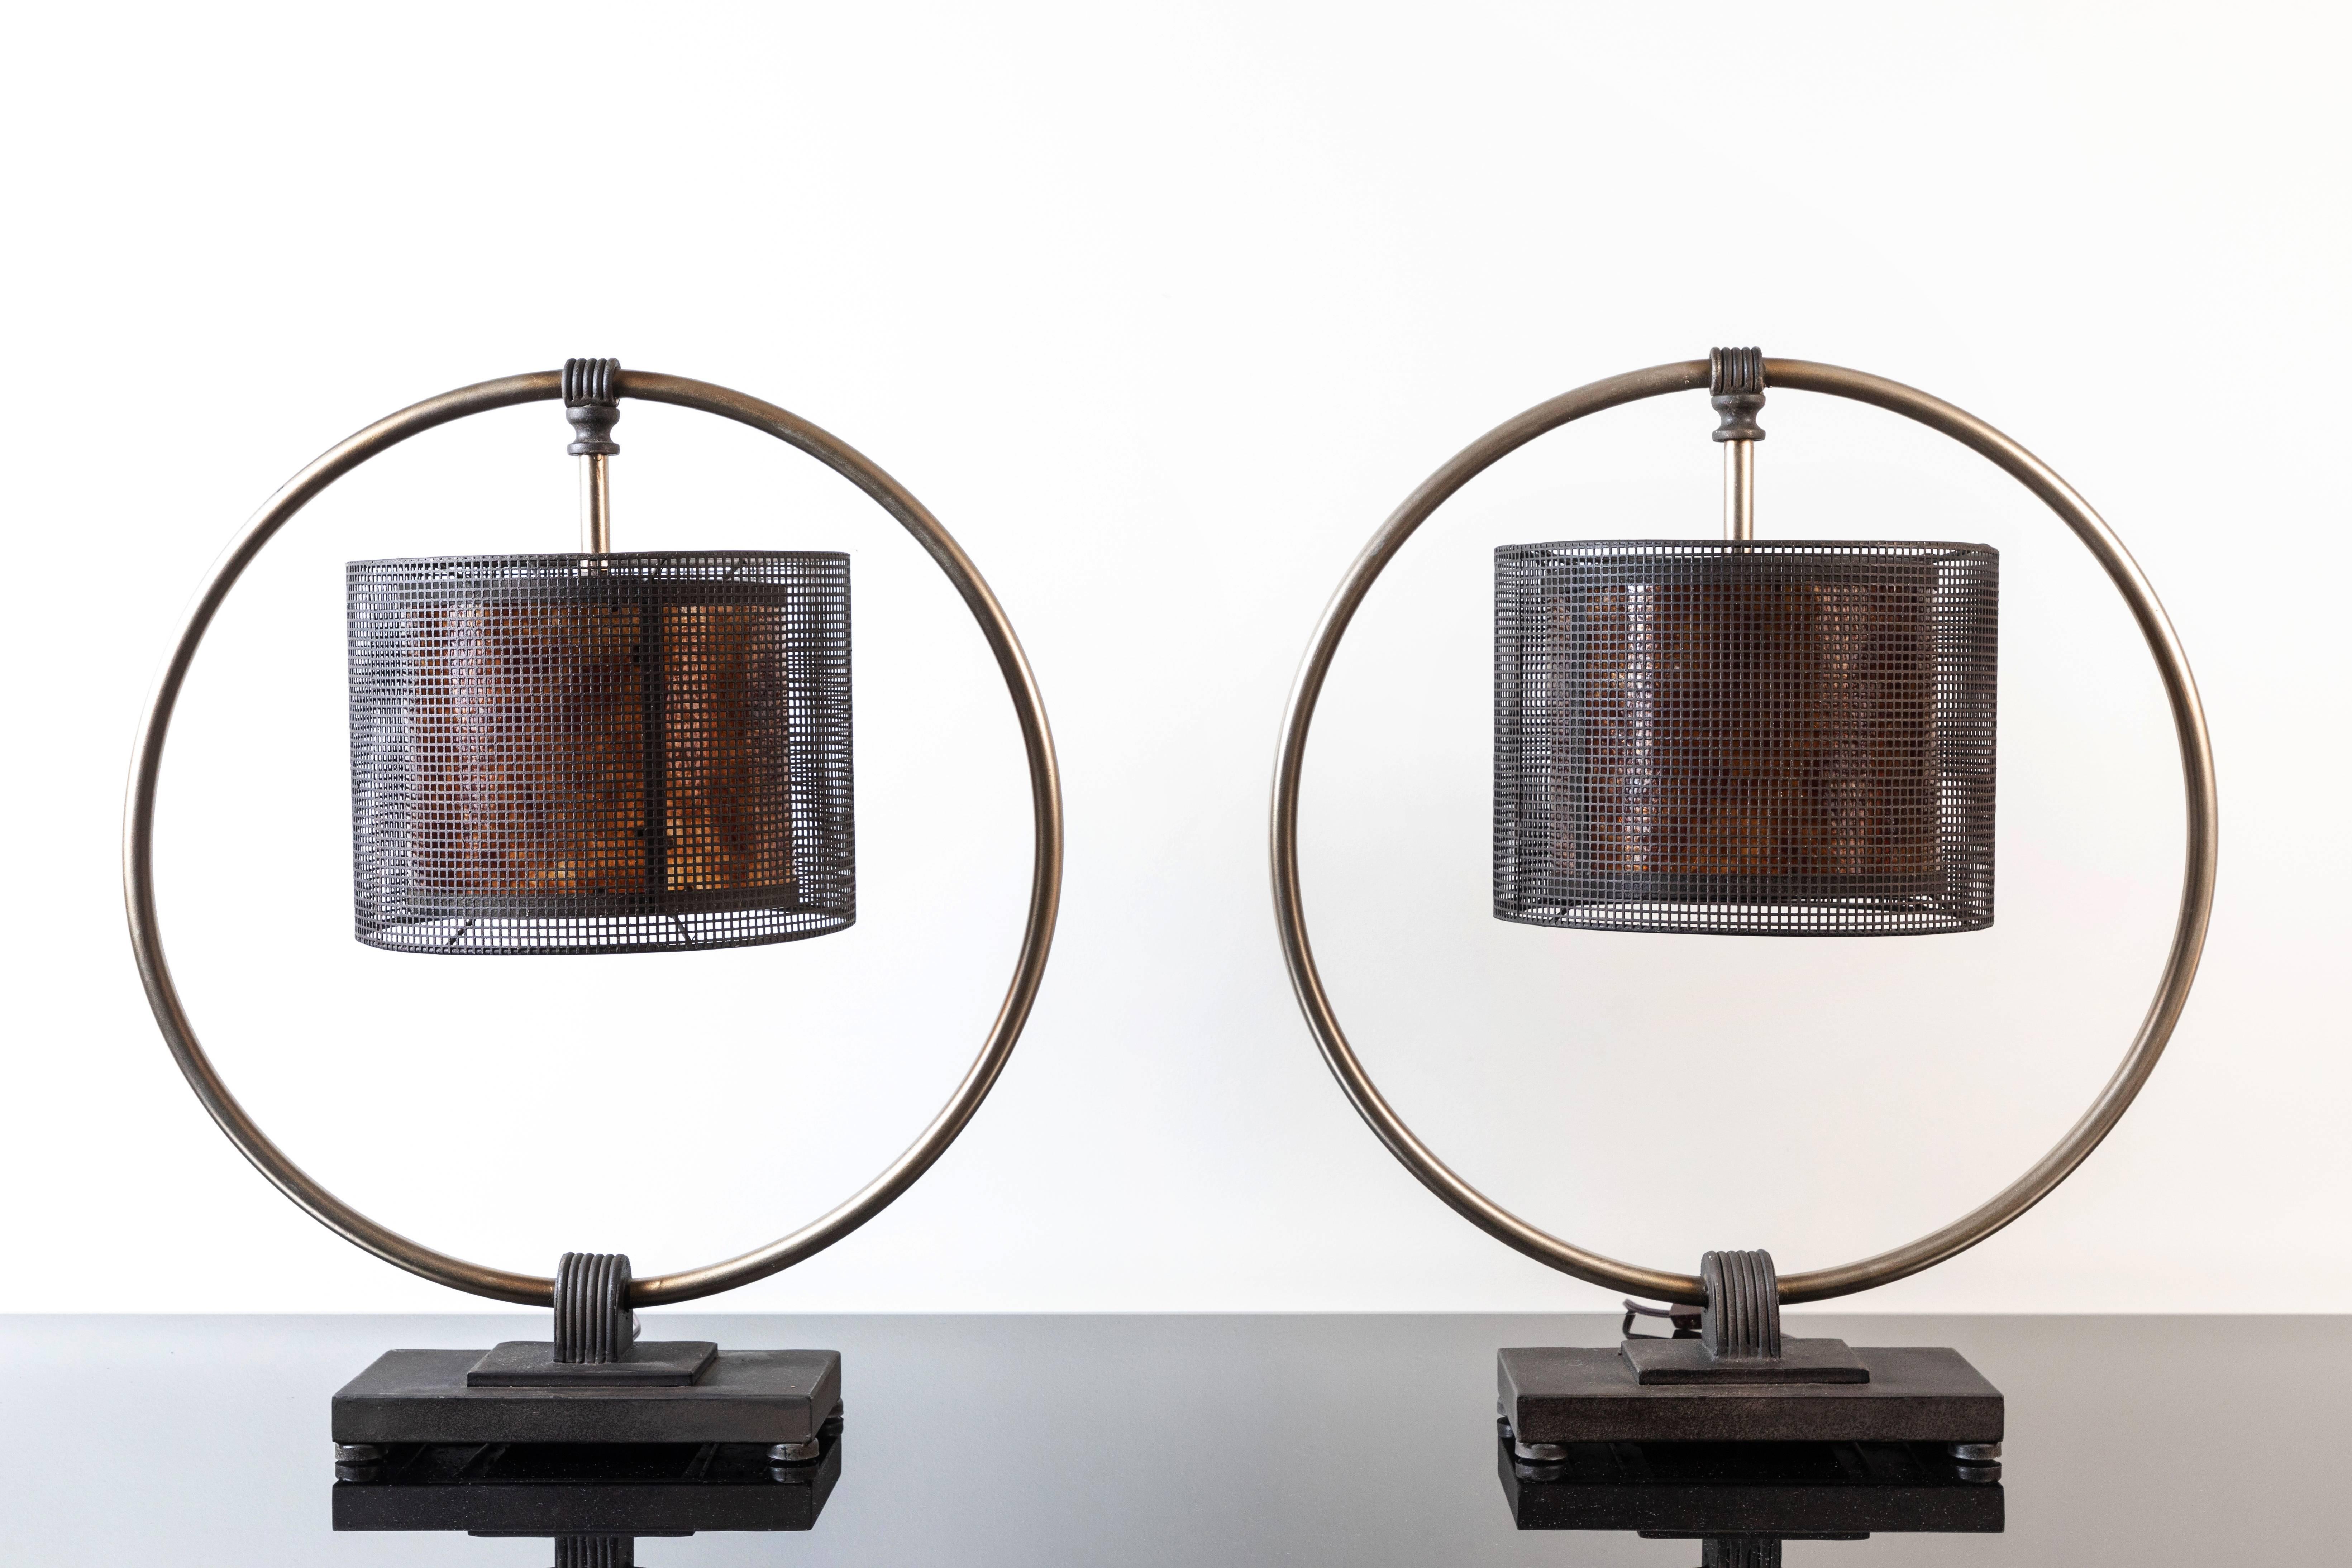 Unusual pair of metal lamps attributed to Aldo Tura, 1980s. Industrial with a Memphis vibe, the lamps have a round metal ring attached to a metal base with a metal mesh shade suspended from the upper part of the ring. Very cool.